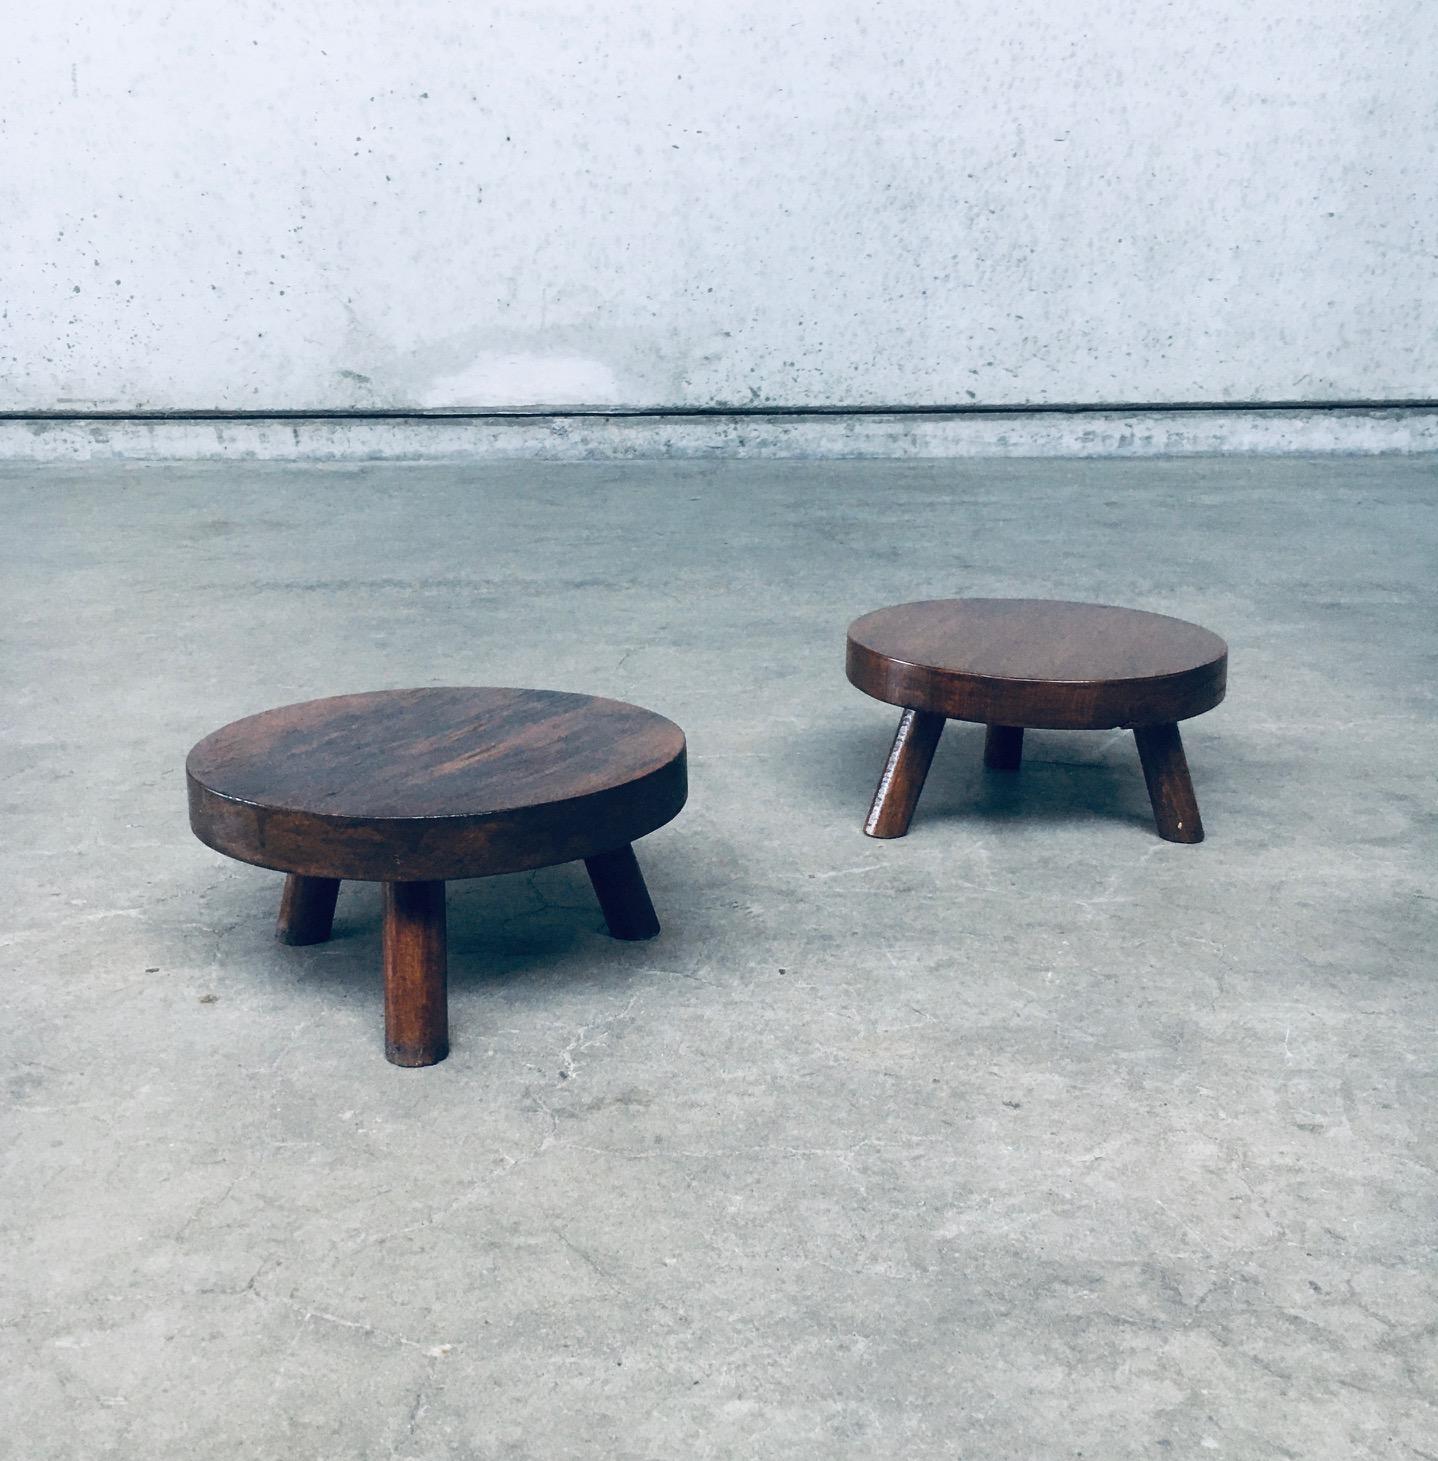 Vintage Midcentury Design Tripod Low Plant Table set of 2. Made in Belgium, 1960's period. Beech wood constructed solid round top and tripod legs. Plant stands, vase display stands ... These come in very good condition. Each measures 13cm x 27cm x